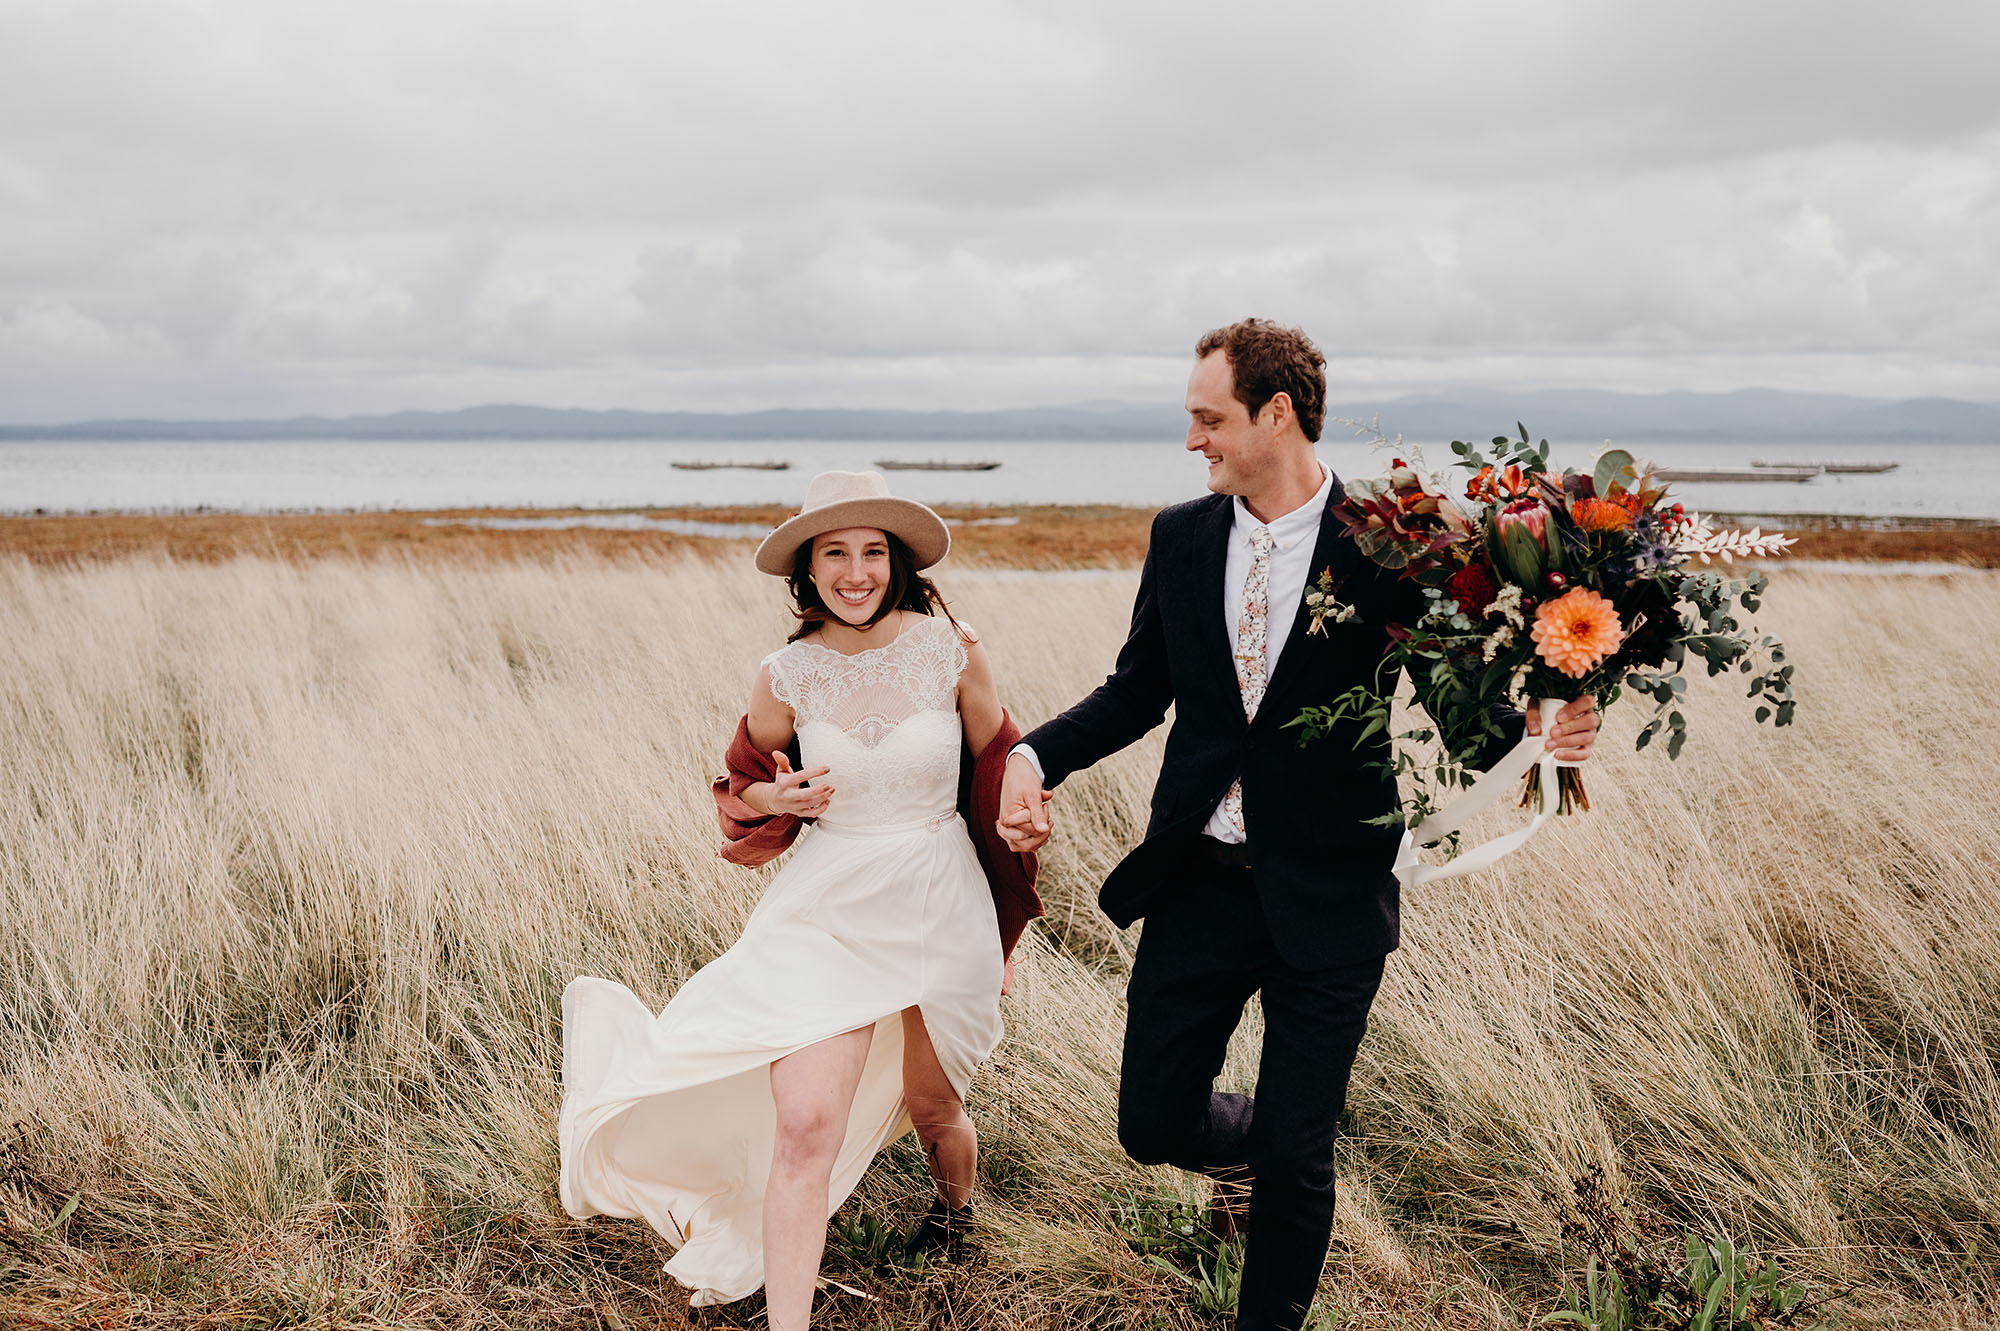 Bride & Groom Walking through the Dunes by Briana Morrison Photography